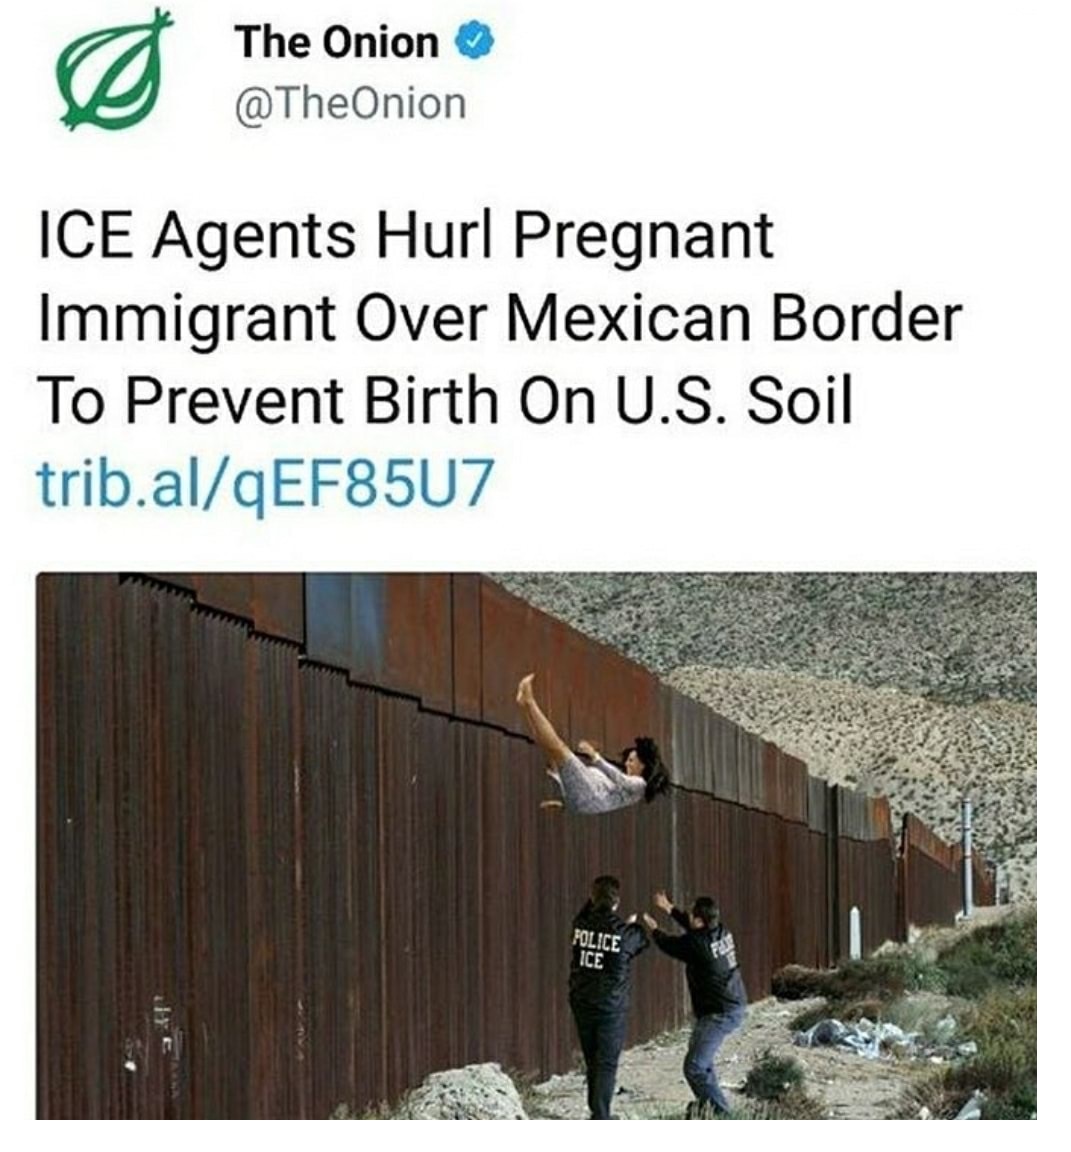 wood - The Onion Ice Agents Hurl Pregnant Immigrant Over Mexican Border To Prevent Birth On U.S. Soil trib.alqEF8507 Police Ice